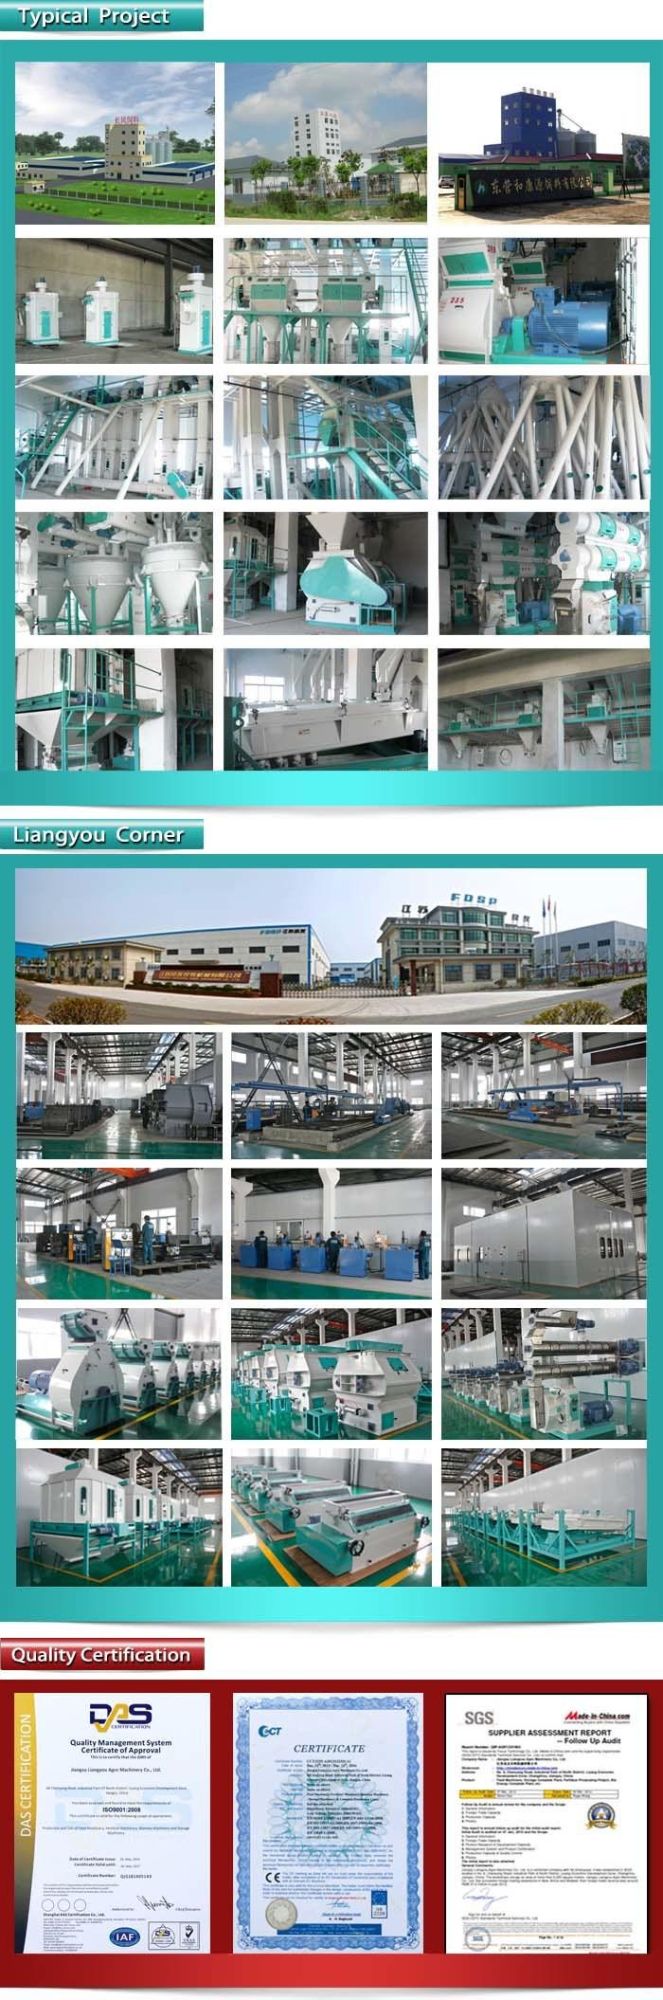 Top Class Animal Food Processing Machinery